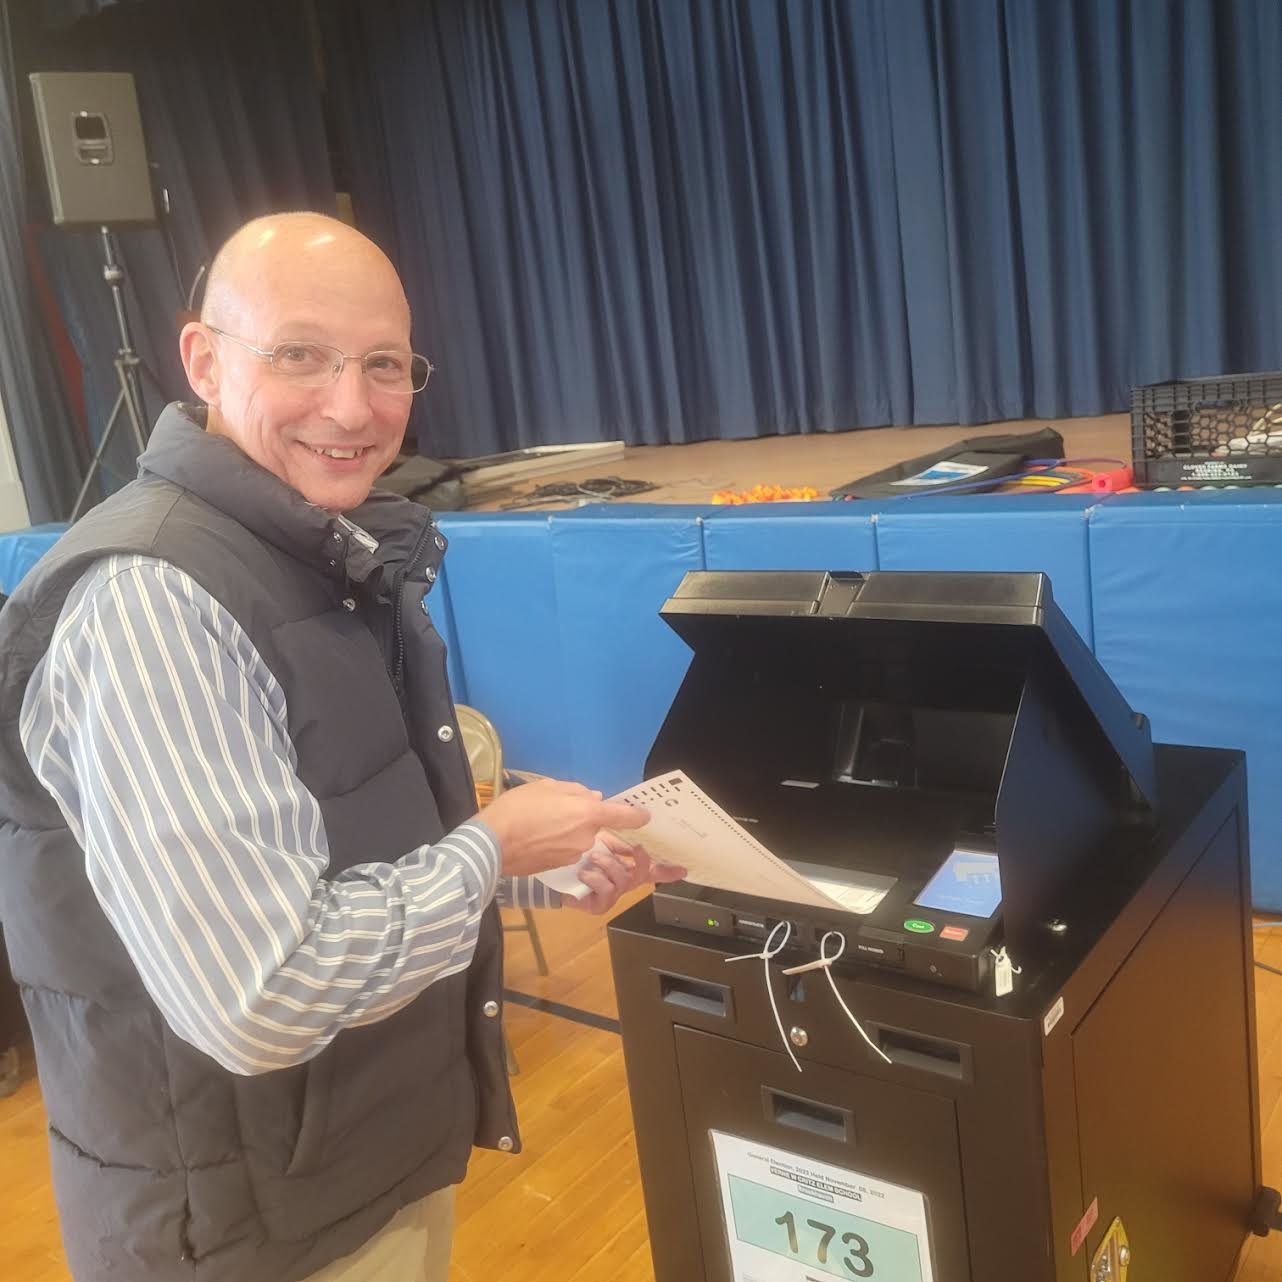 Dean Murray, the newly elected assemblyman, voted at Verne Critz in East Patchogue on Election Day.